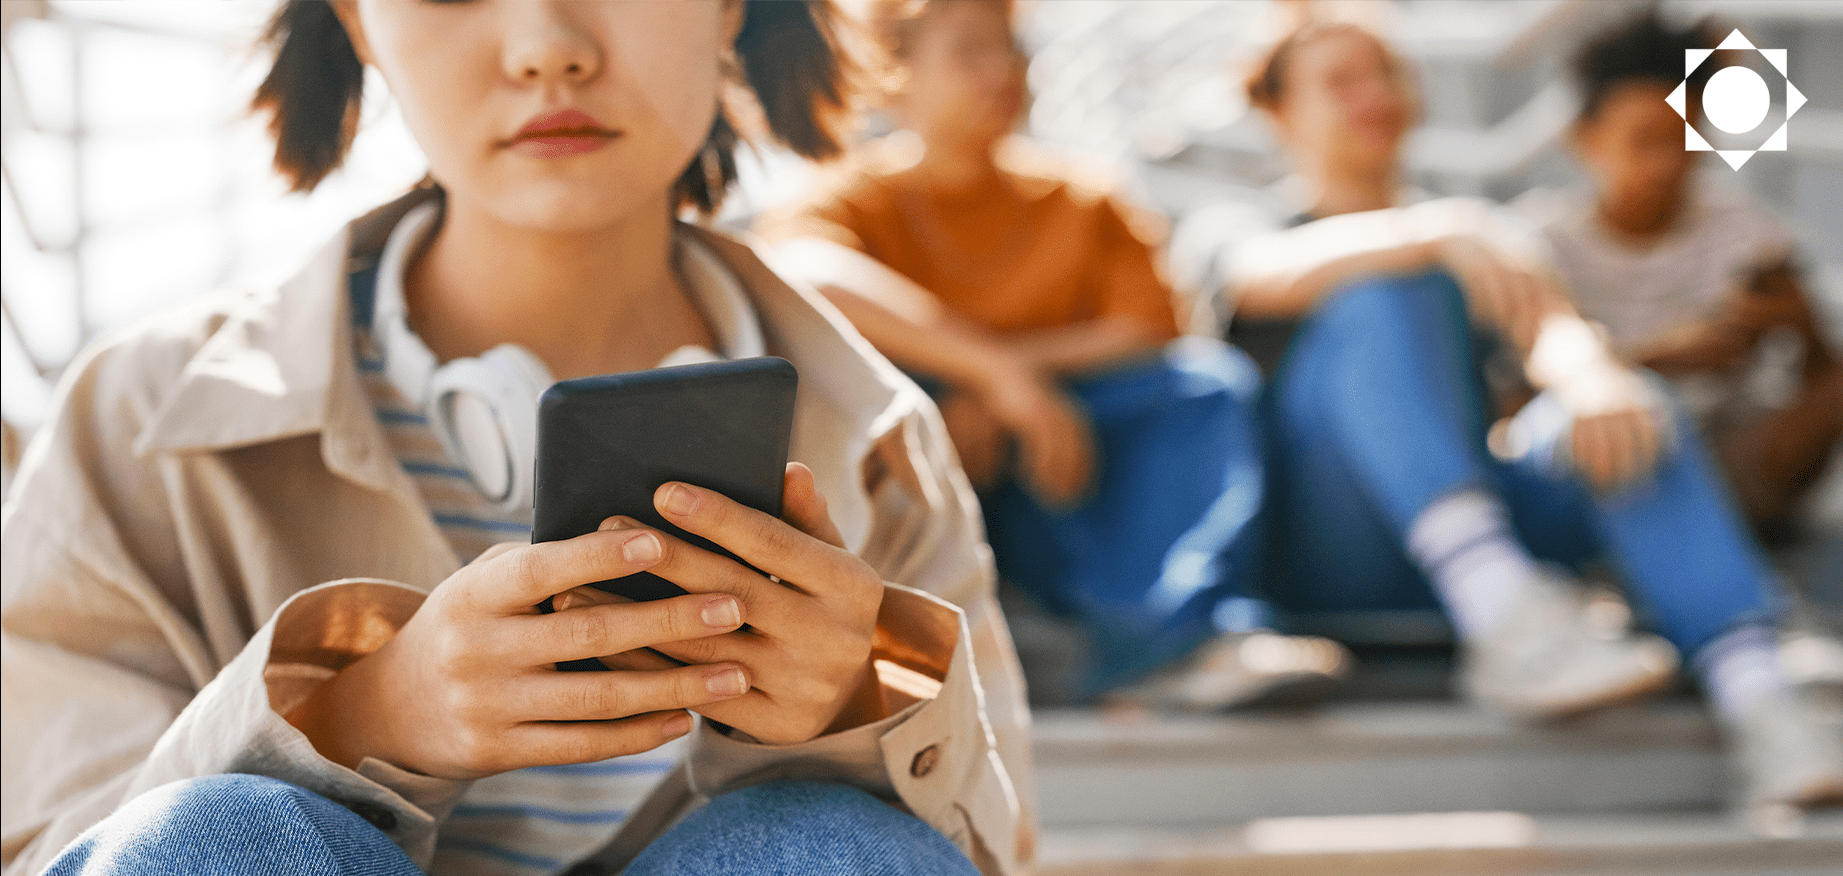 SHARE: How to Address and Prevent Cyberbullying